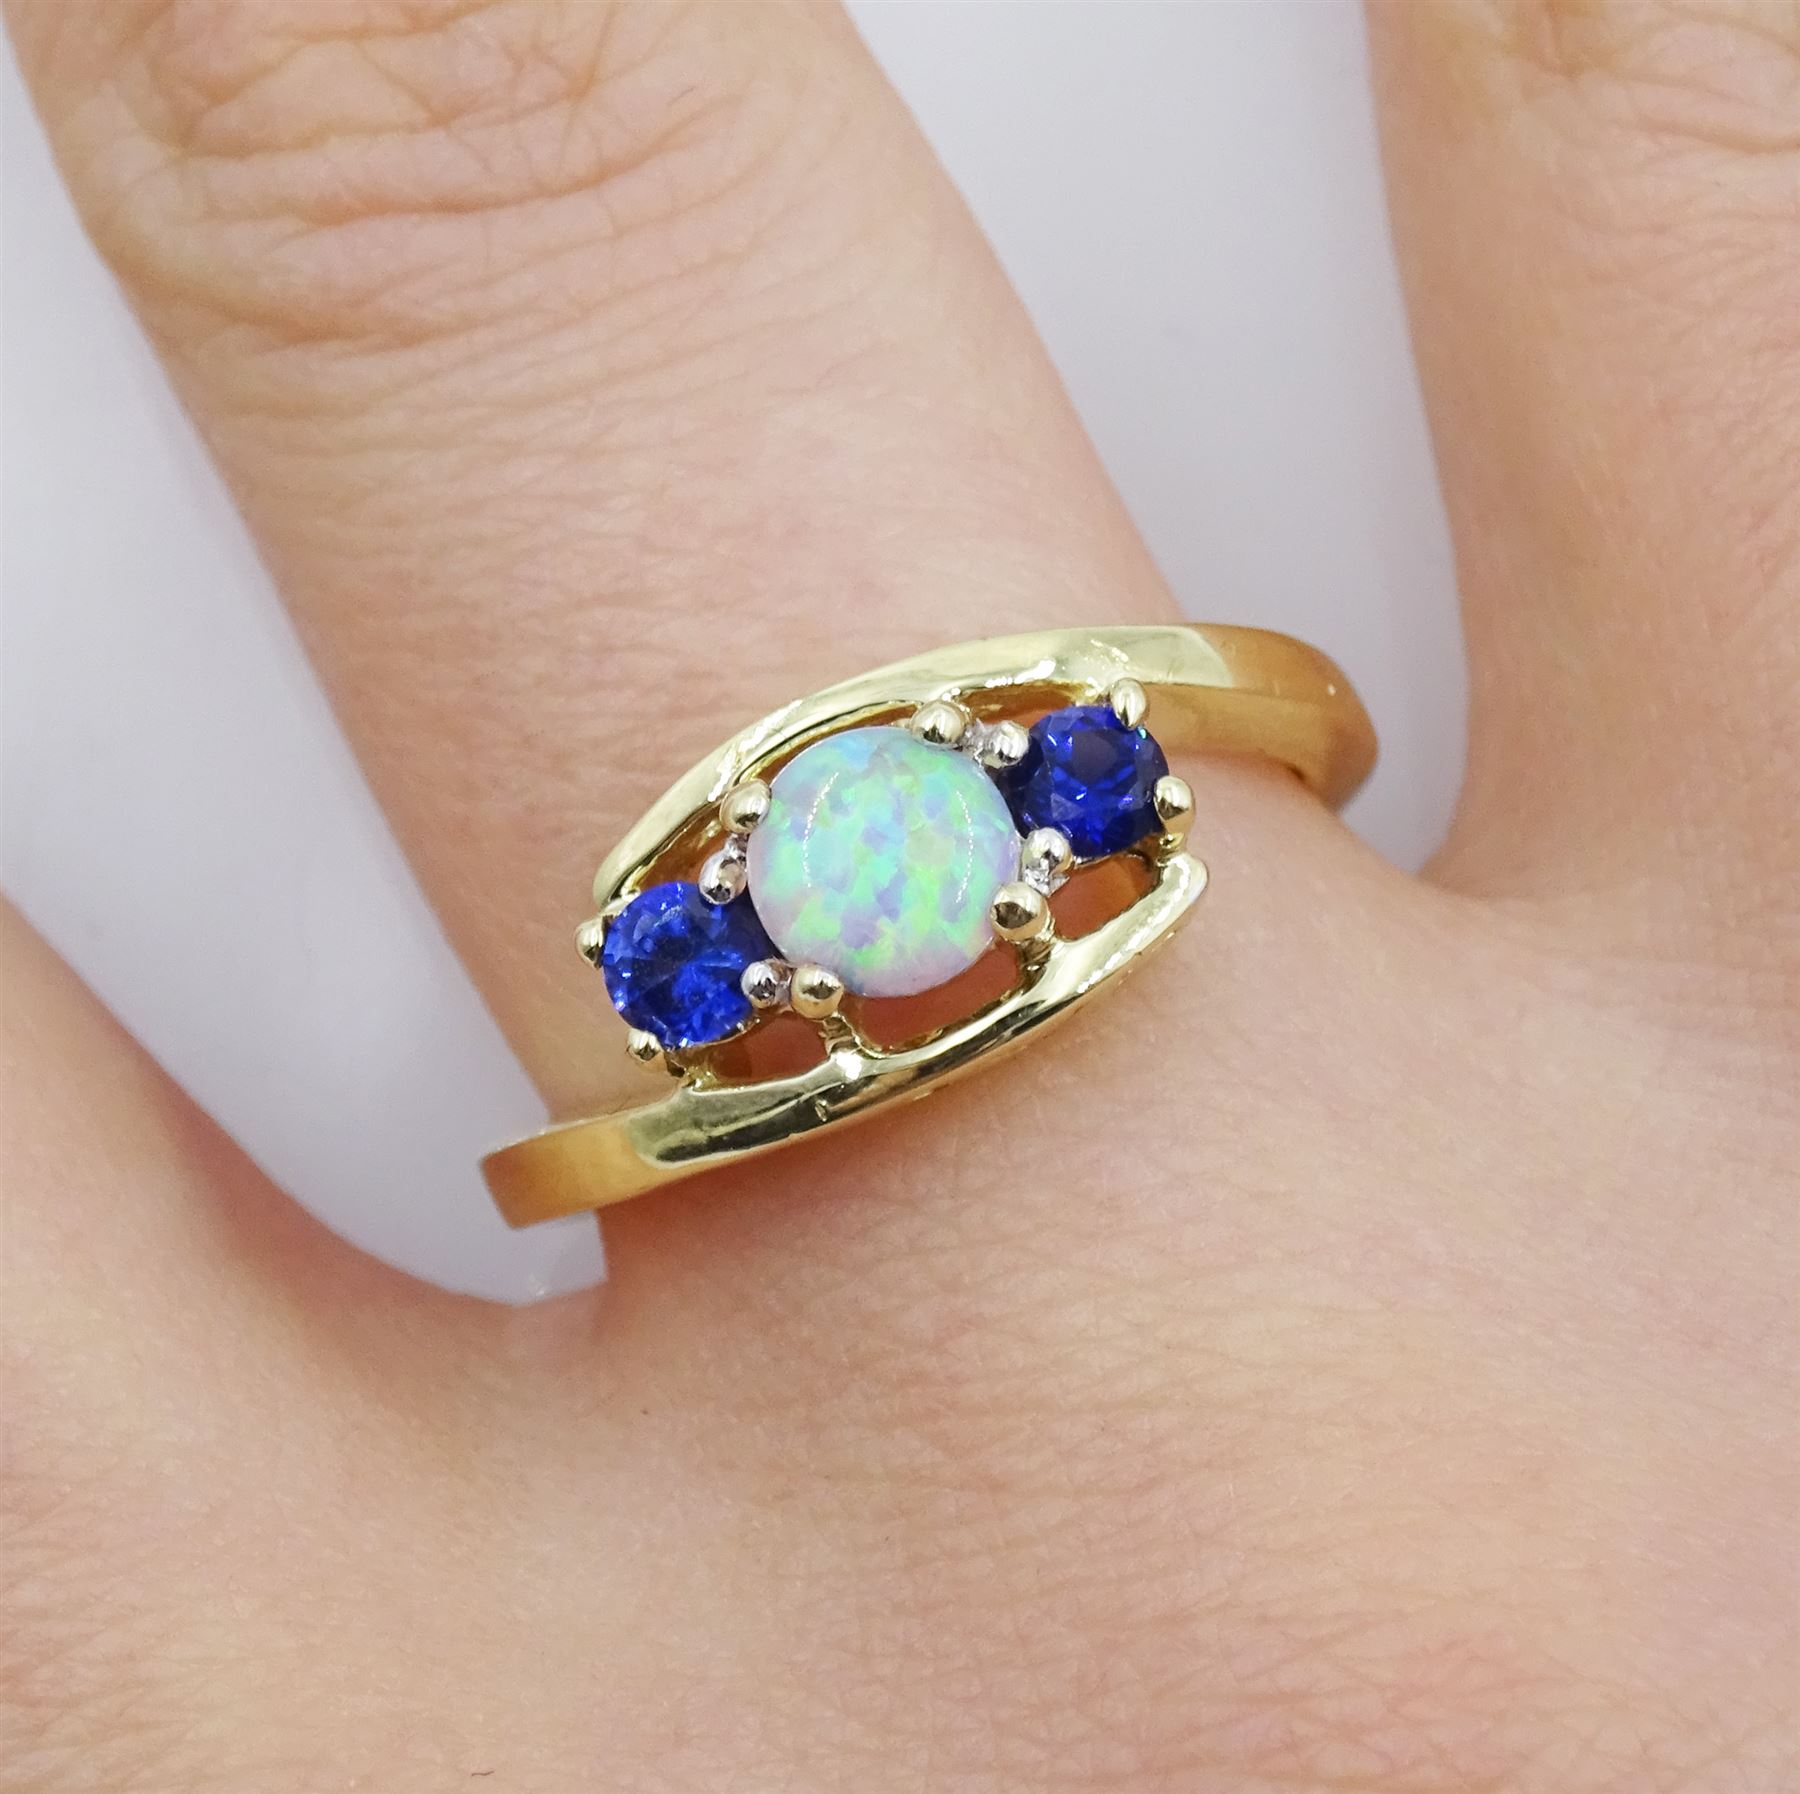 9ct gold opal and sapphire ring with 'love' gallery - Image 2 of 7